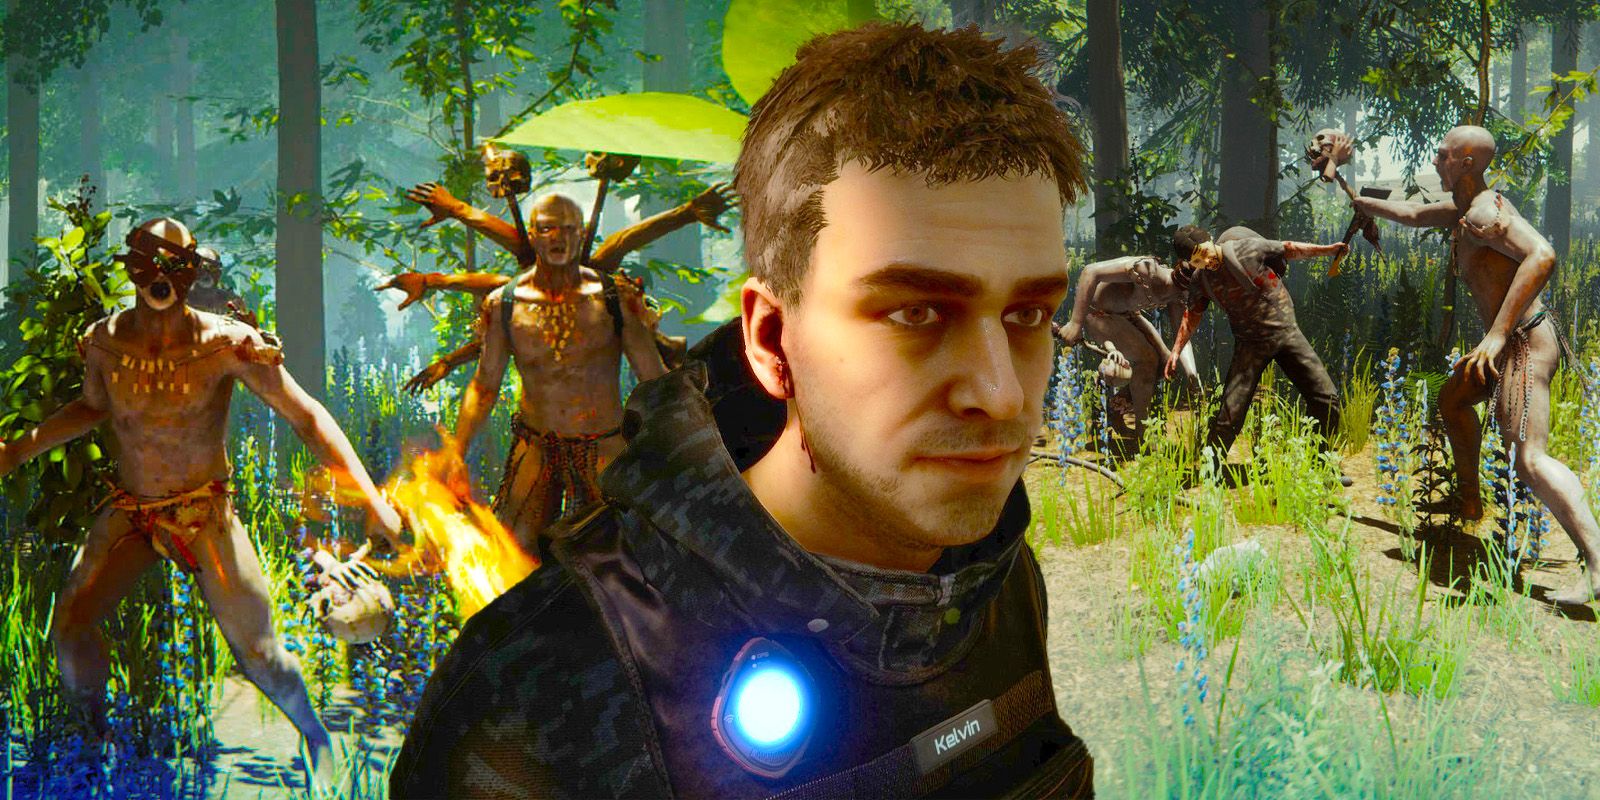 The Forest player character With Cannibals Behind Him